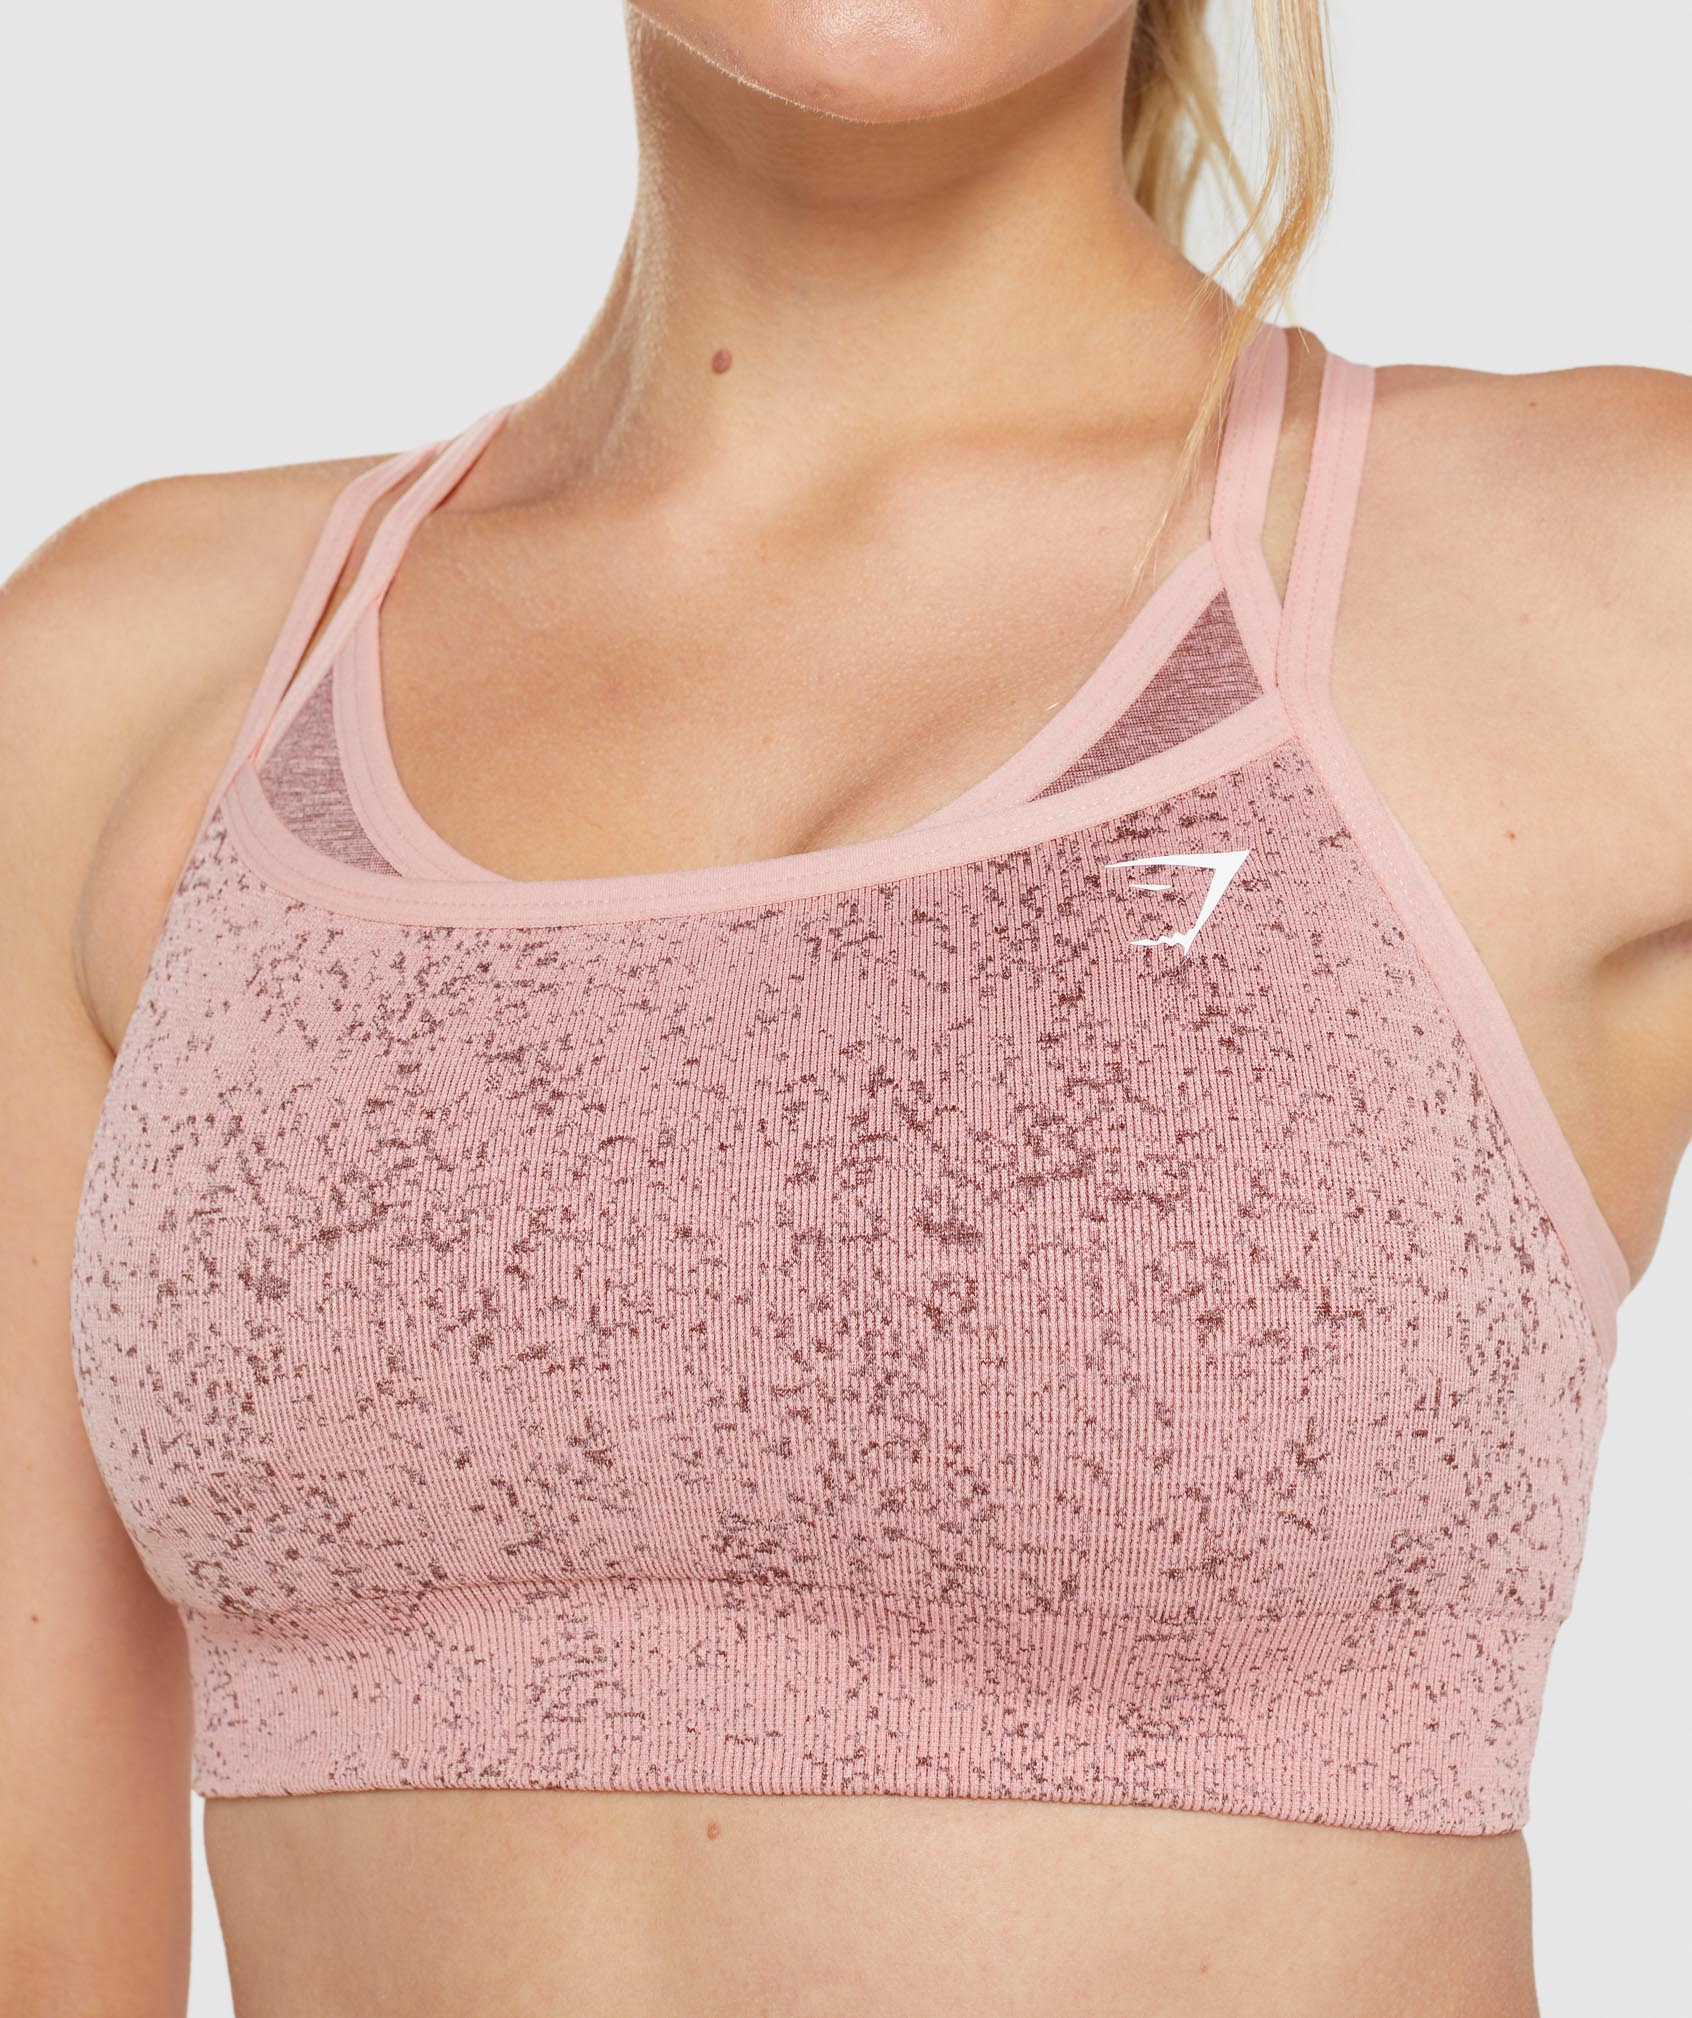 Gymshark Camo Seamless Sports Bra Pink Size XS - $39 New With Tags